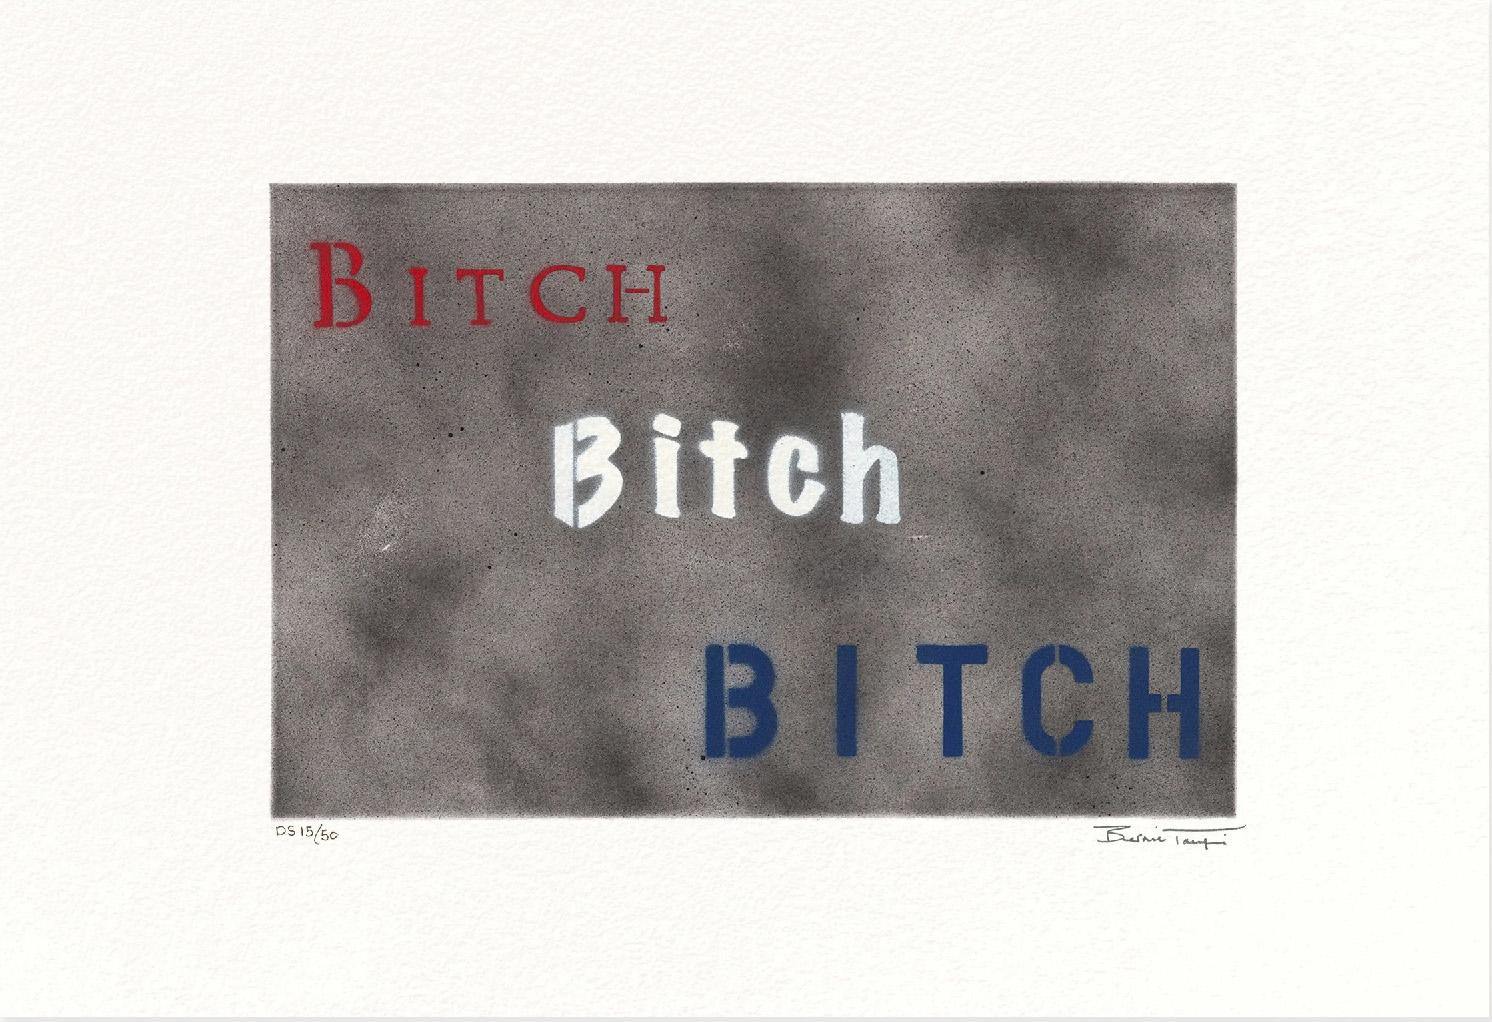 MEDIUM: Giclée on Arches Paper
IMAGE SIZE: 20" x 28"
SKU: ...

Bernie Taupin's views art as a visual extension of his song lyrics. Inspired by The Bitch is Back,” released in 1974.